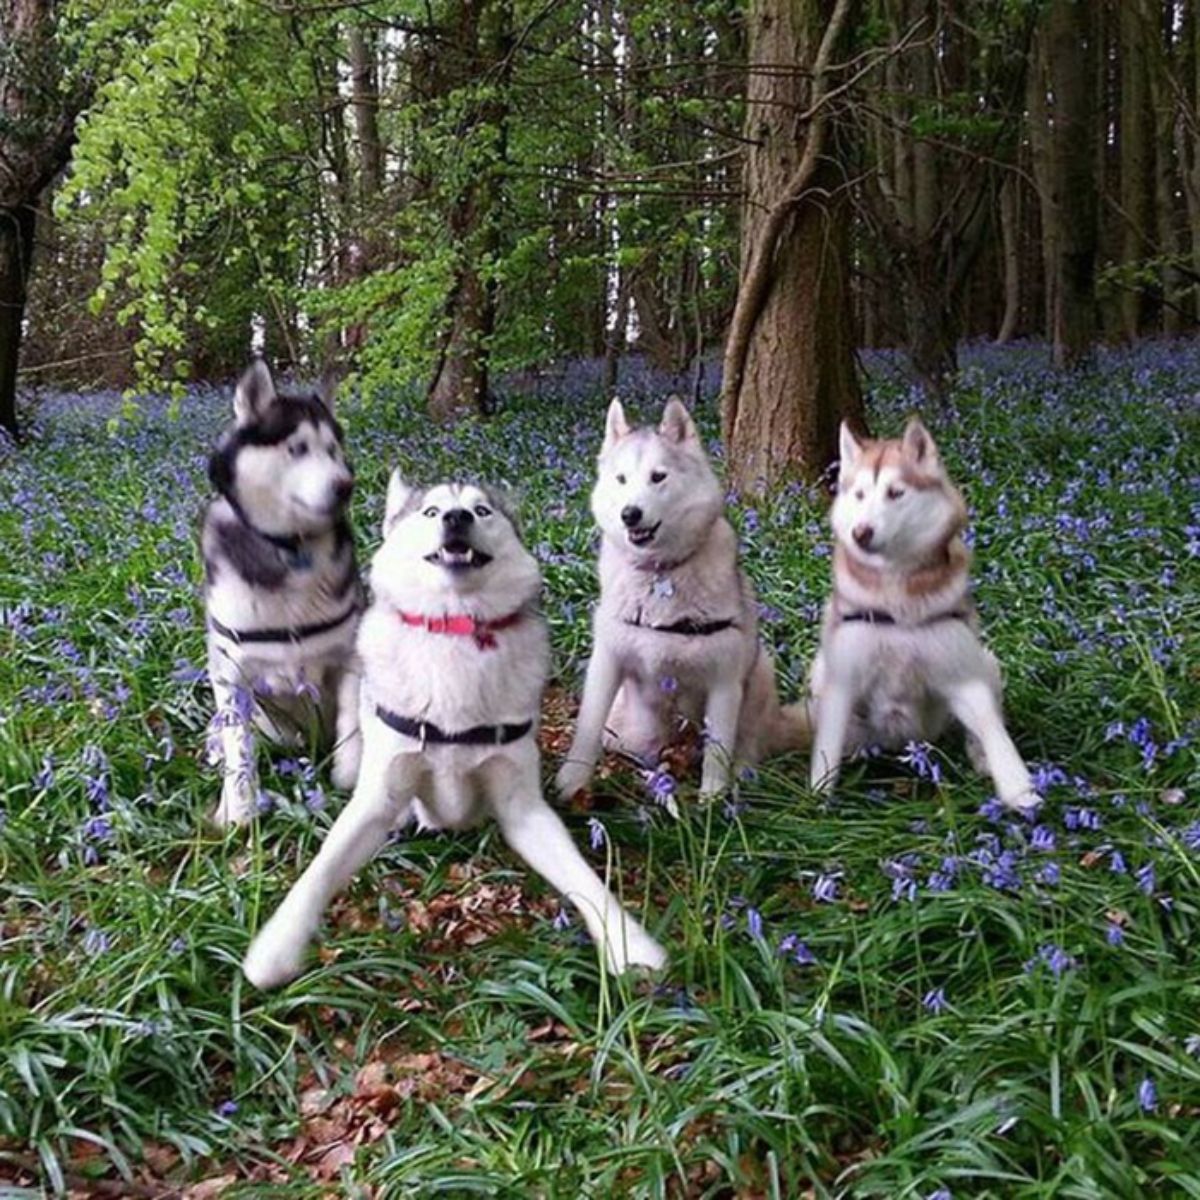 3 black and white huskies and 1 brown and white husky in a row with the 2nd black and white husky looking hyper